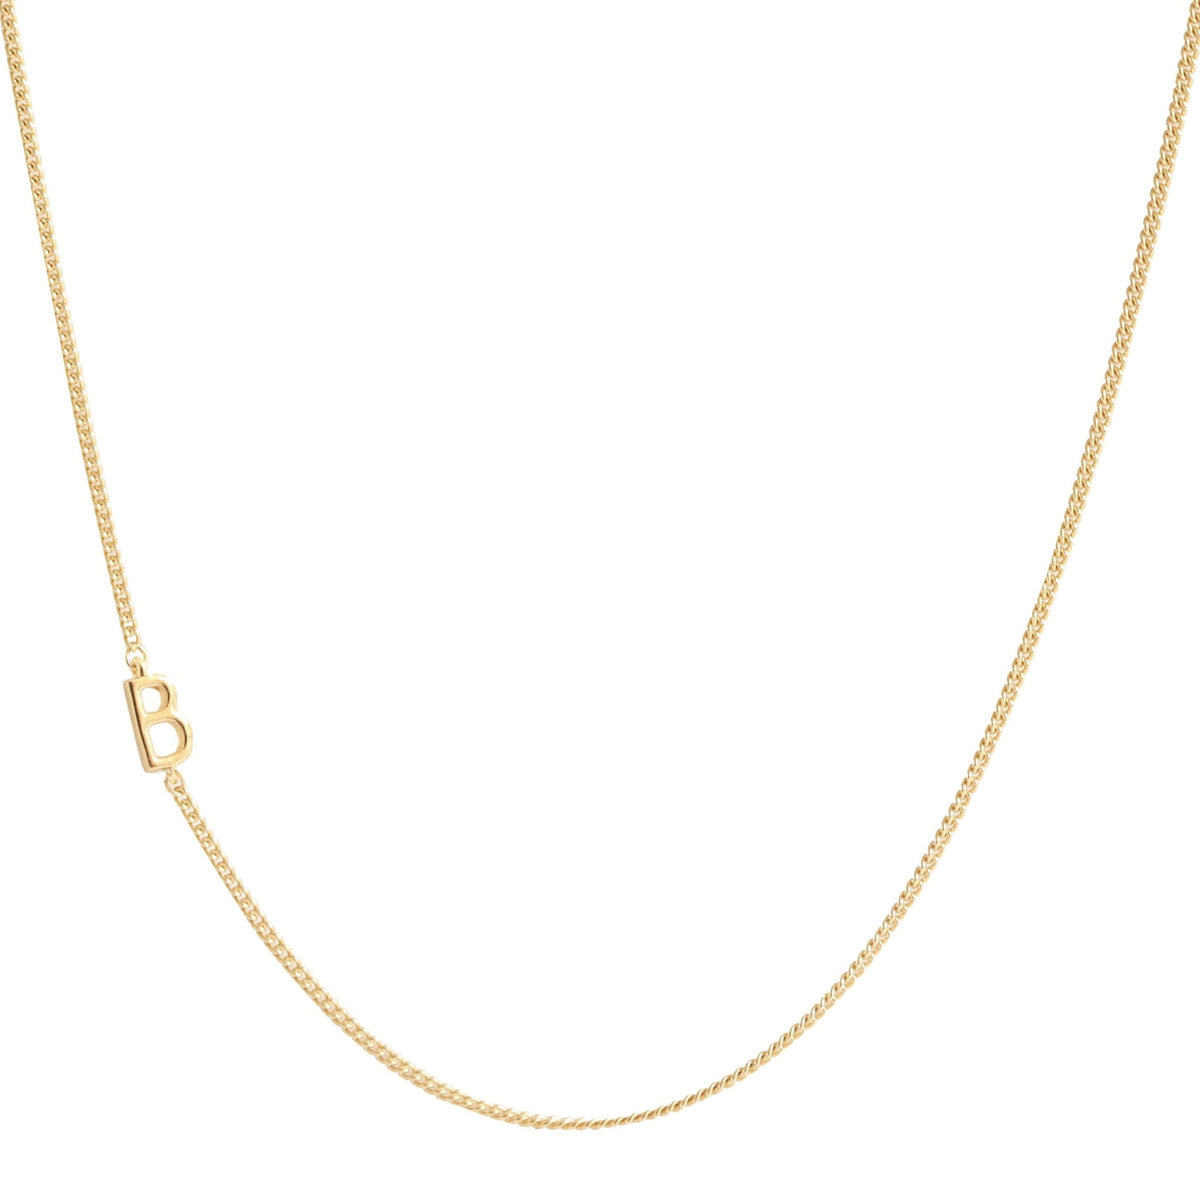 NOTABLE OFFSET INITIAL NECKLACE - B - GOLD - SO PRETTY CARA COTTER